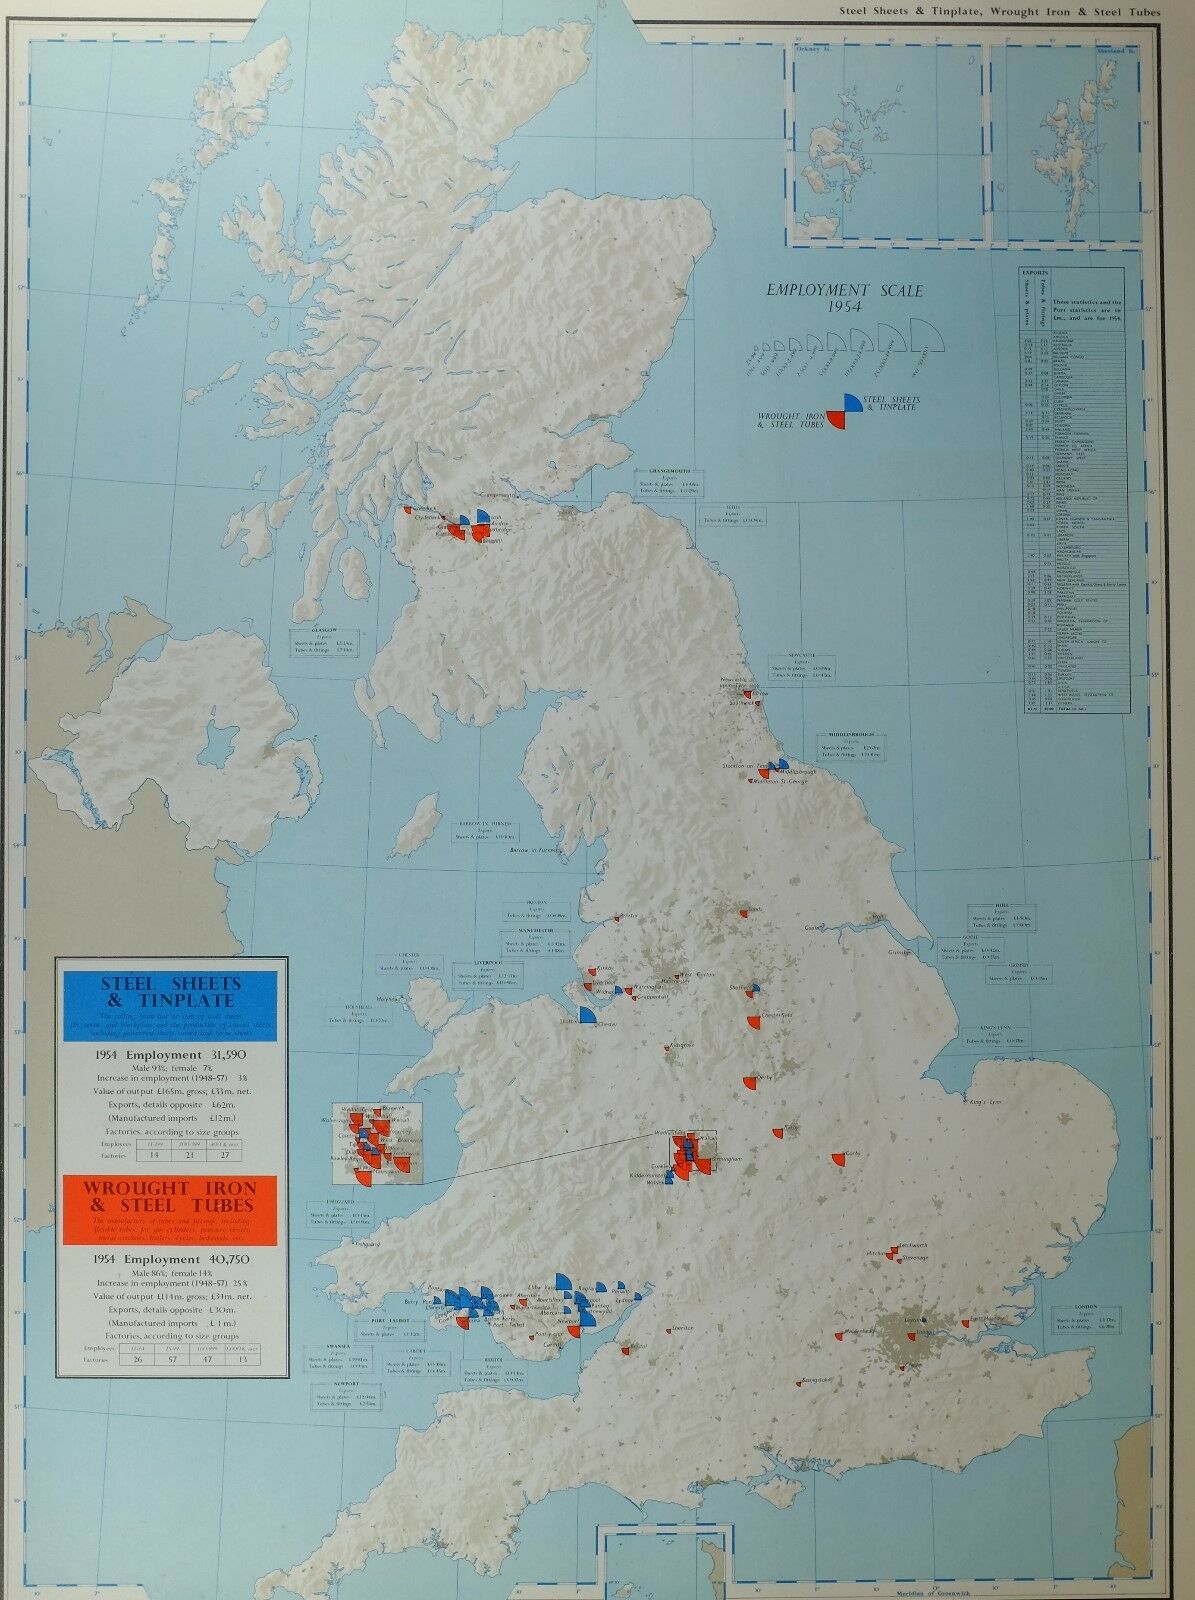 Vintage Large Map Of Britain Steel Sheets & Tinplate Wrought Iron Steel Tubes